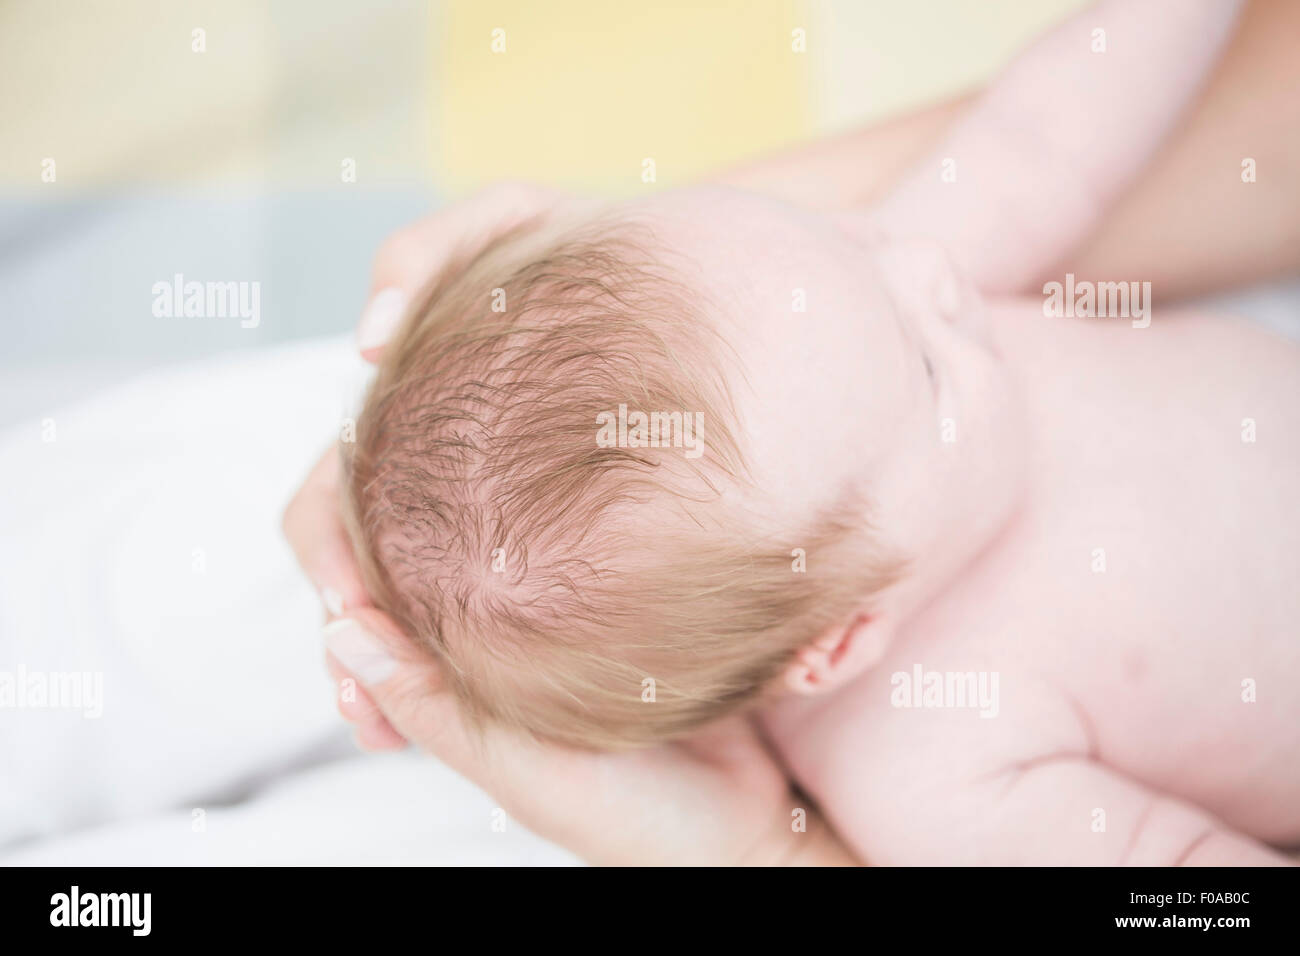 Mother cradling baby in arms Stock Photo